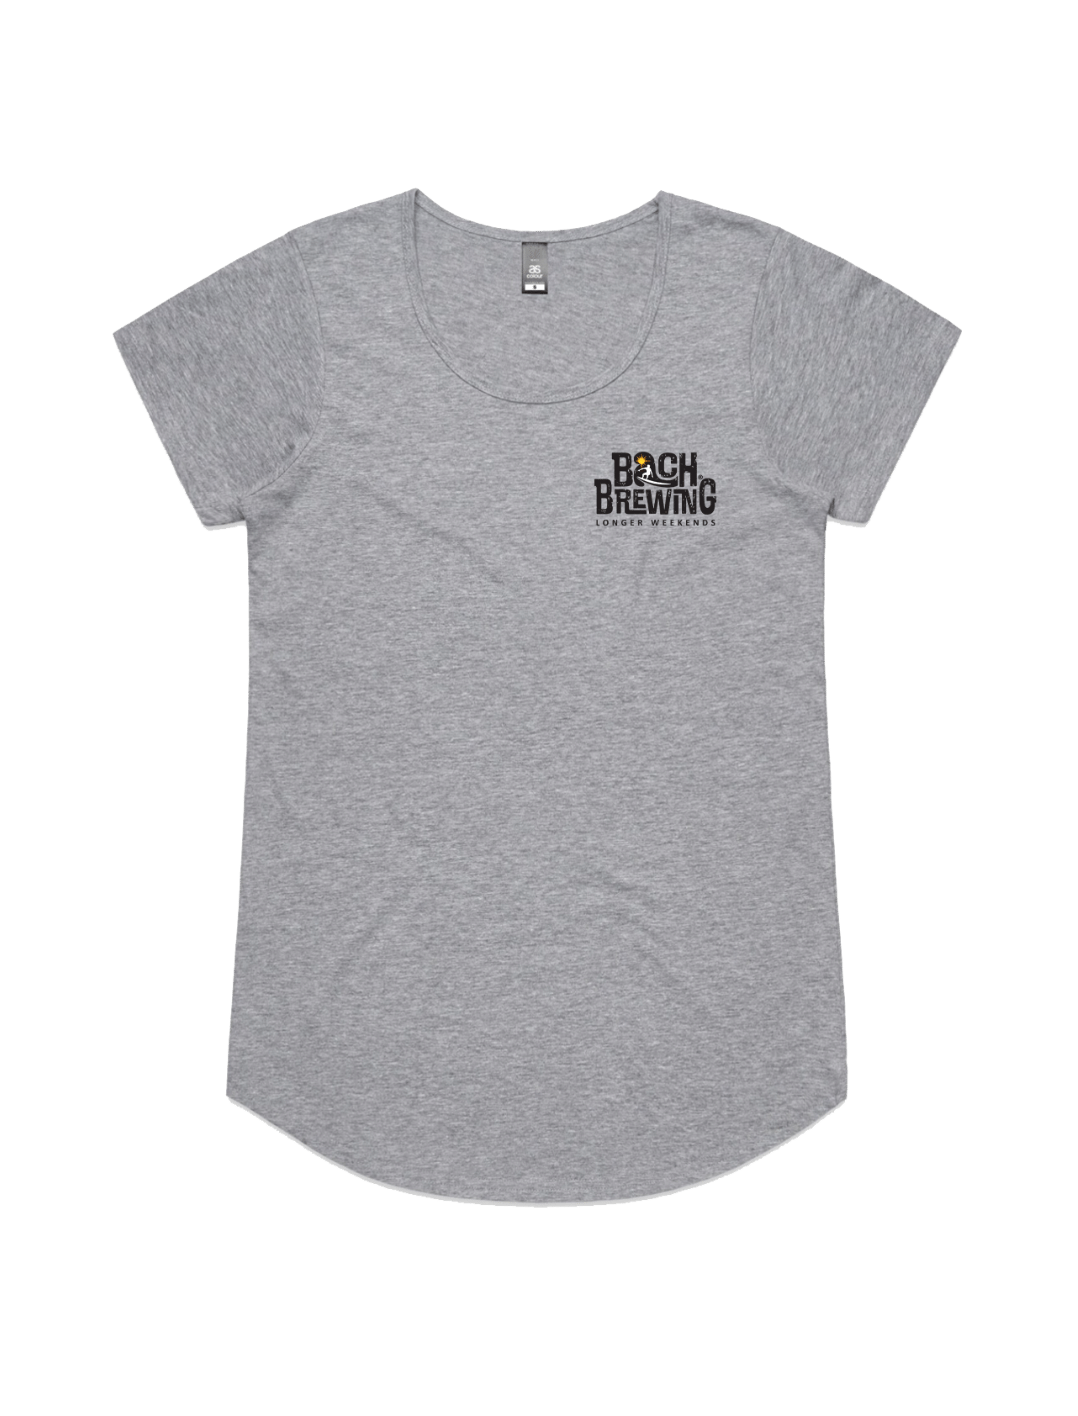 Bach Brewing Womens Short Sleeve T-shirt - Supajuice (back graphic)